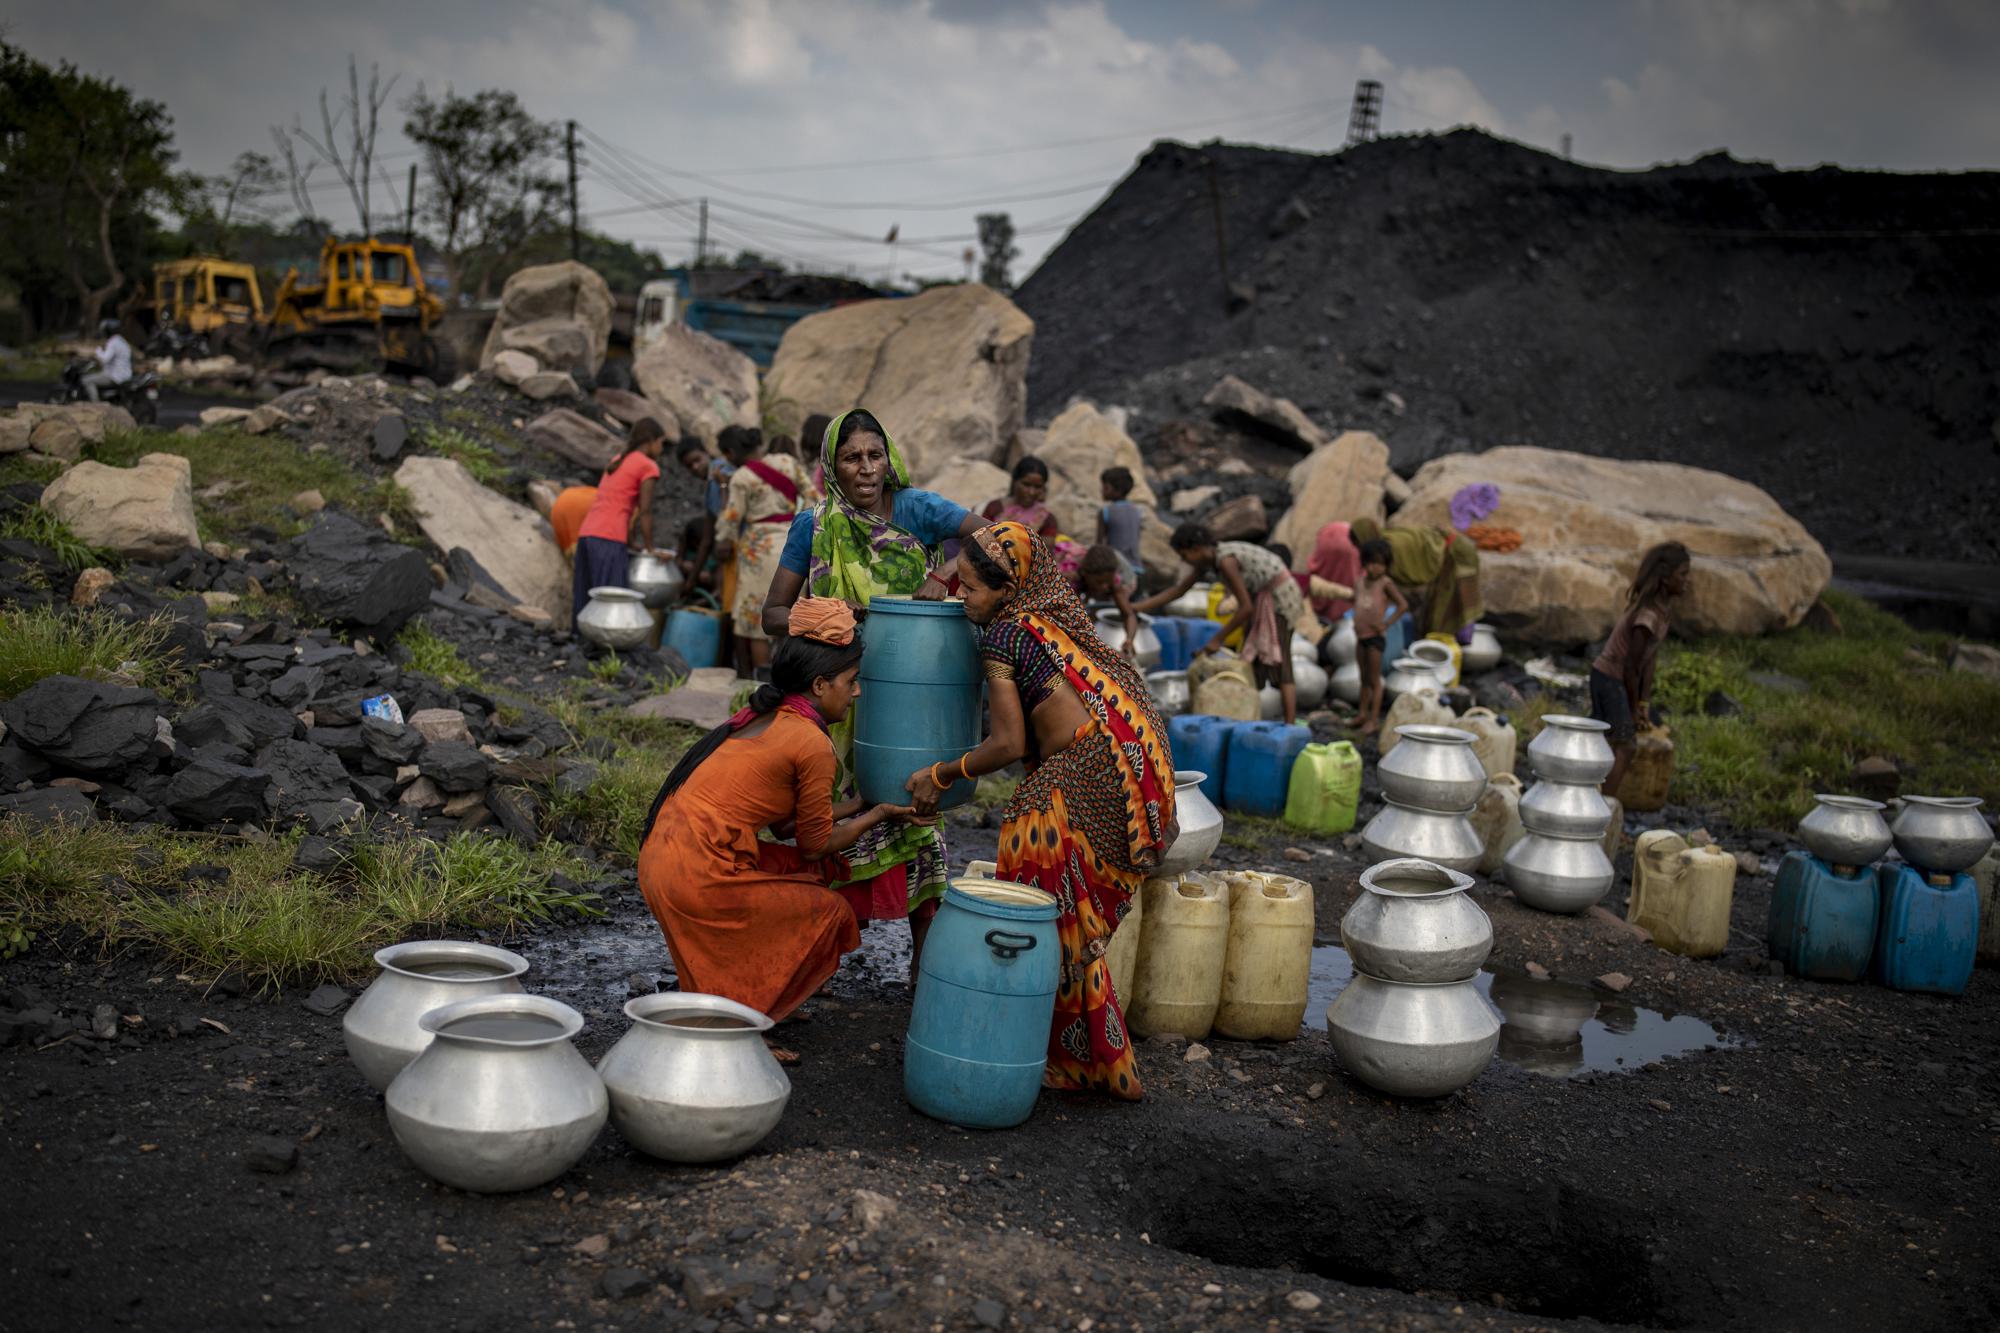 Members of coal workers' community fetch drinking water from a pipe at a coal depot near an open-caste mine in Dhanbad, an eastern Indian city in Jharkhand state, Friday, Sept. 24, 2021. A 2021 Indian government study found that Jharkhand state -- among the poorest in India and the state with the nation’s largest coal reserves -- is also the most vulnerable Indian state to climate change. Efforts to fight climate change are being held back in part because coal, the biggest single source of climate-changing gases, provides cheap electricity and supports millions of jobs. It's one of the dilemmas facing world leaders gathered in Glasgow, Scotland this week in an attempt to stave off the worst effects of climate change. (AP Photo/Altaf Qadri)